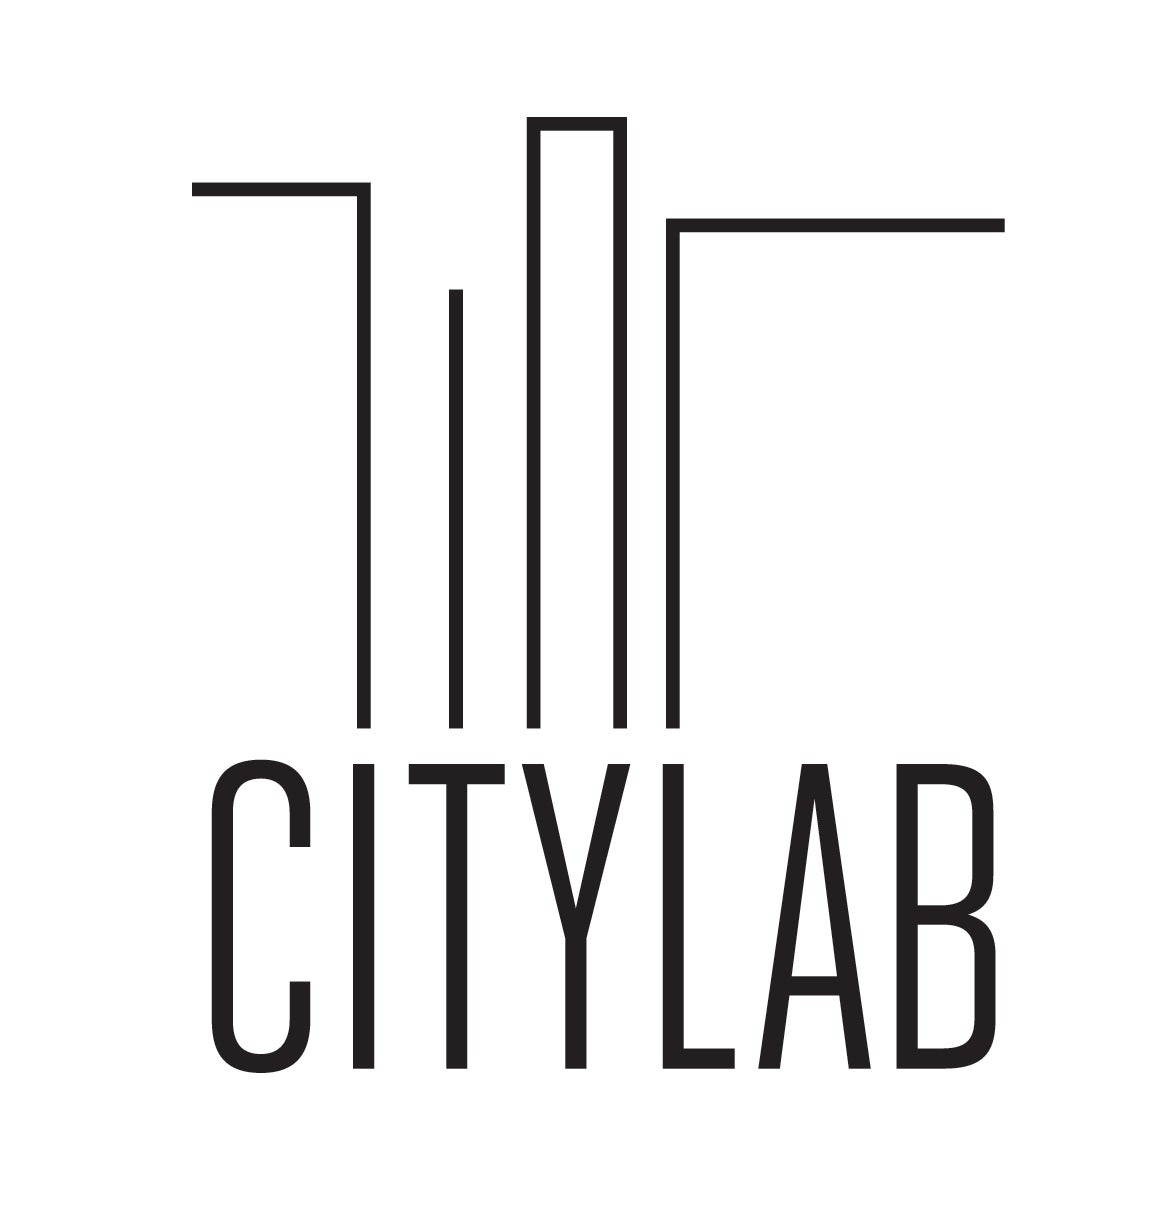 CityLab 2015: Urban Solutions to Global Challenges